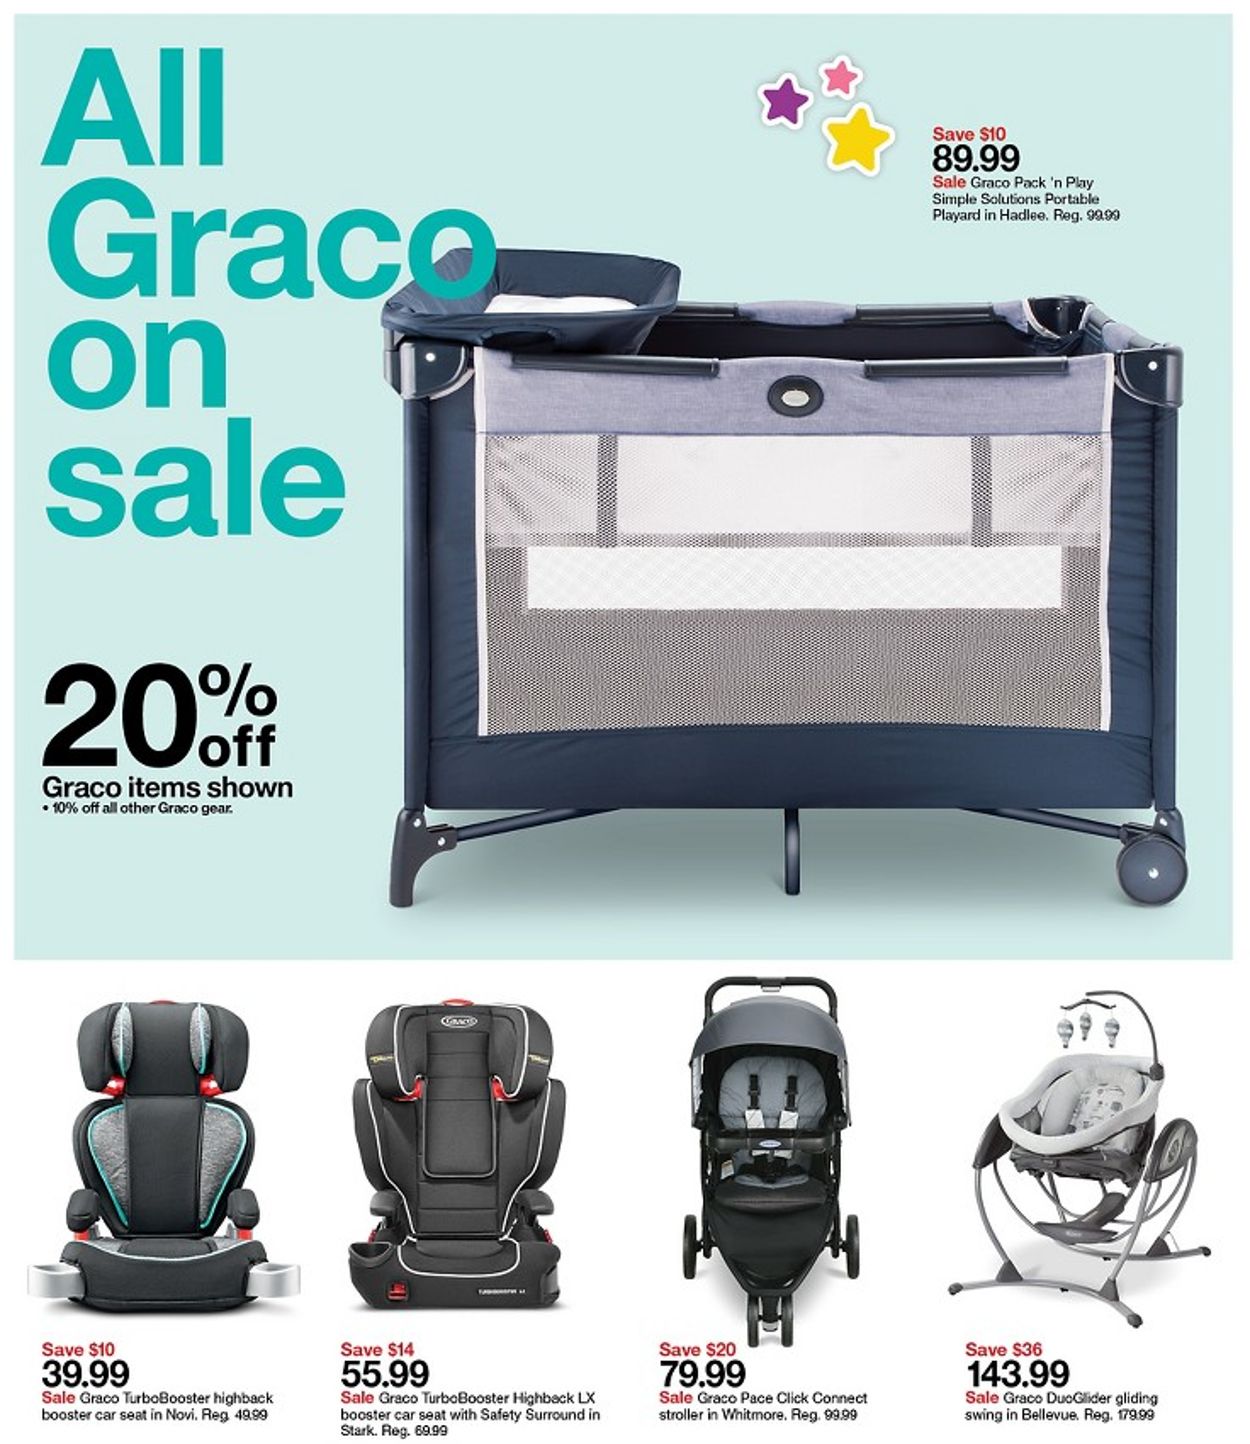 graco pace travel system hadlee